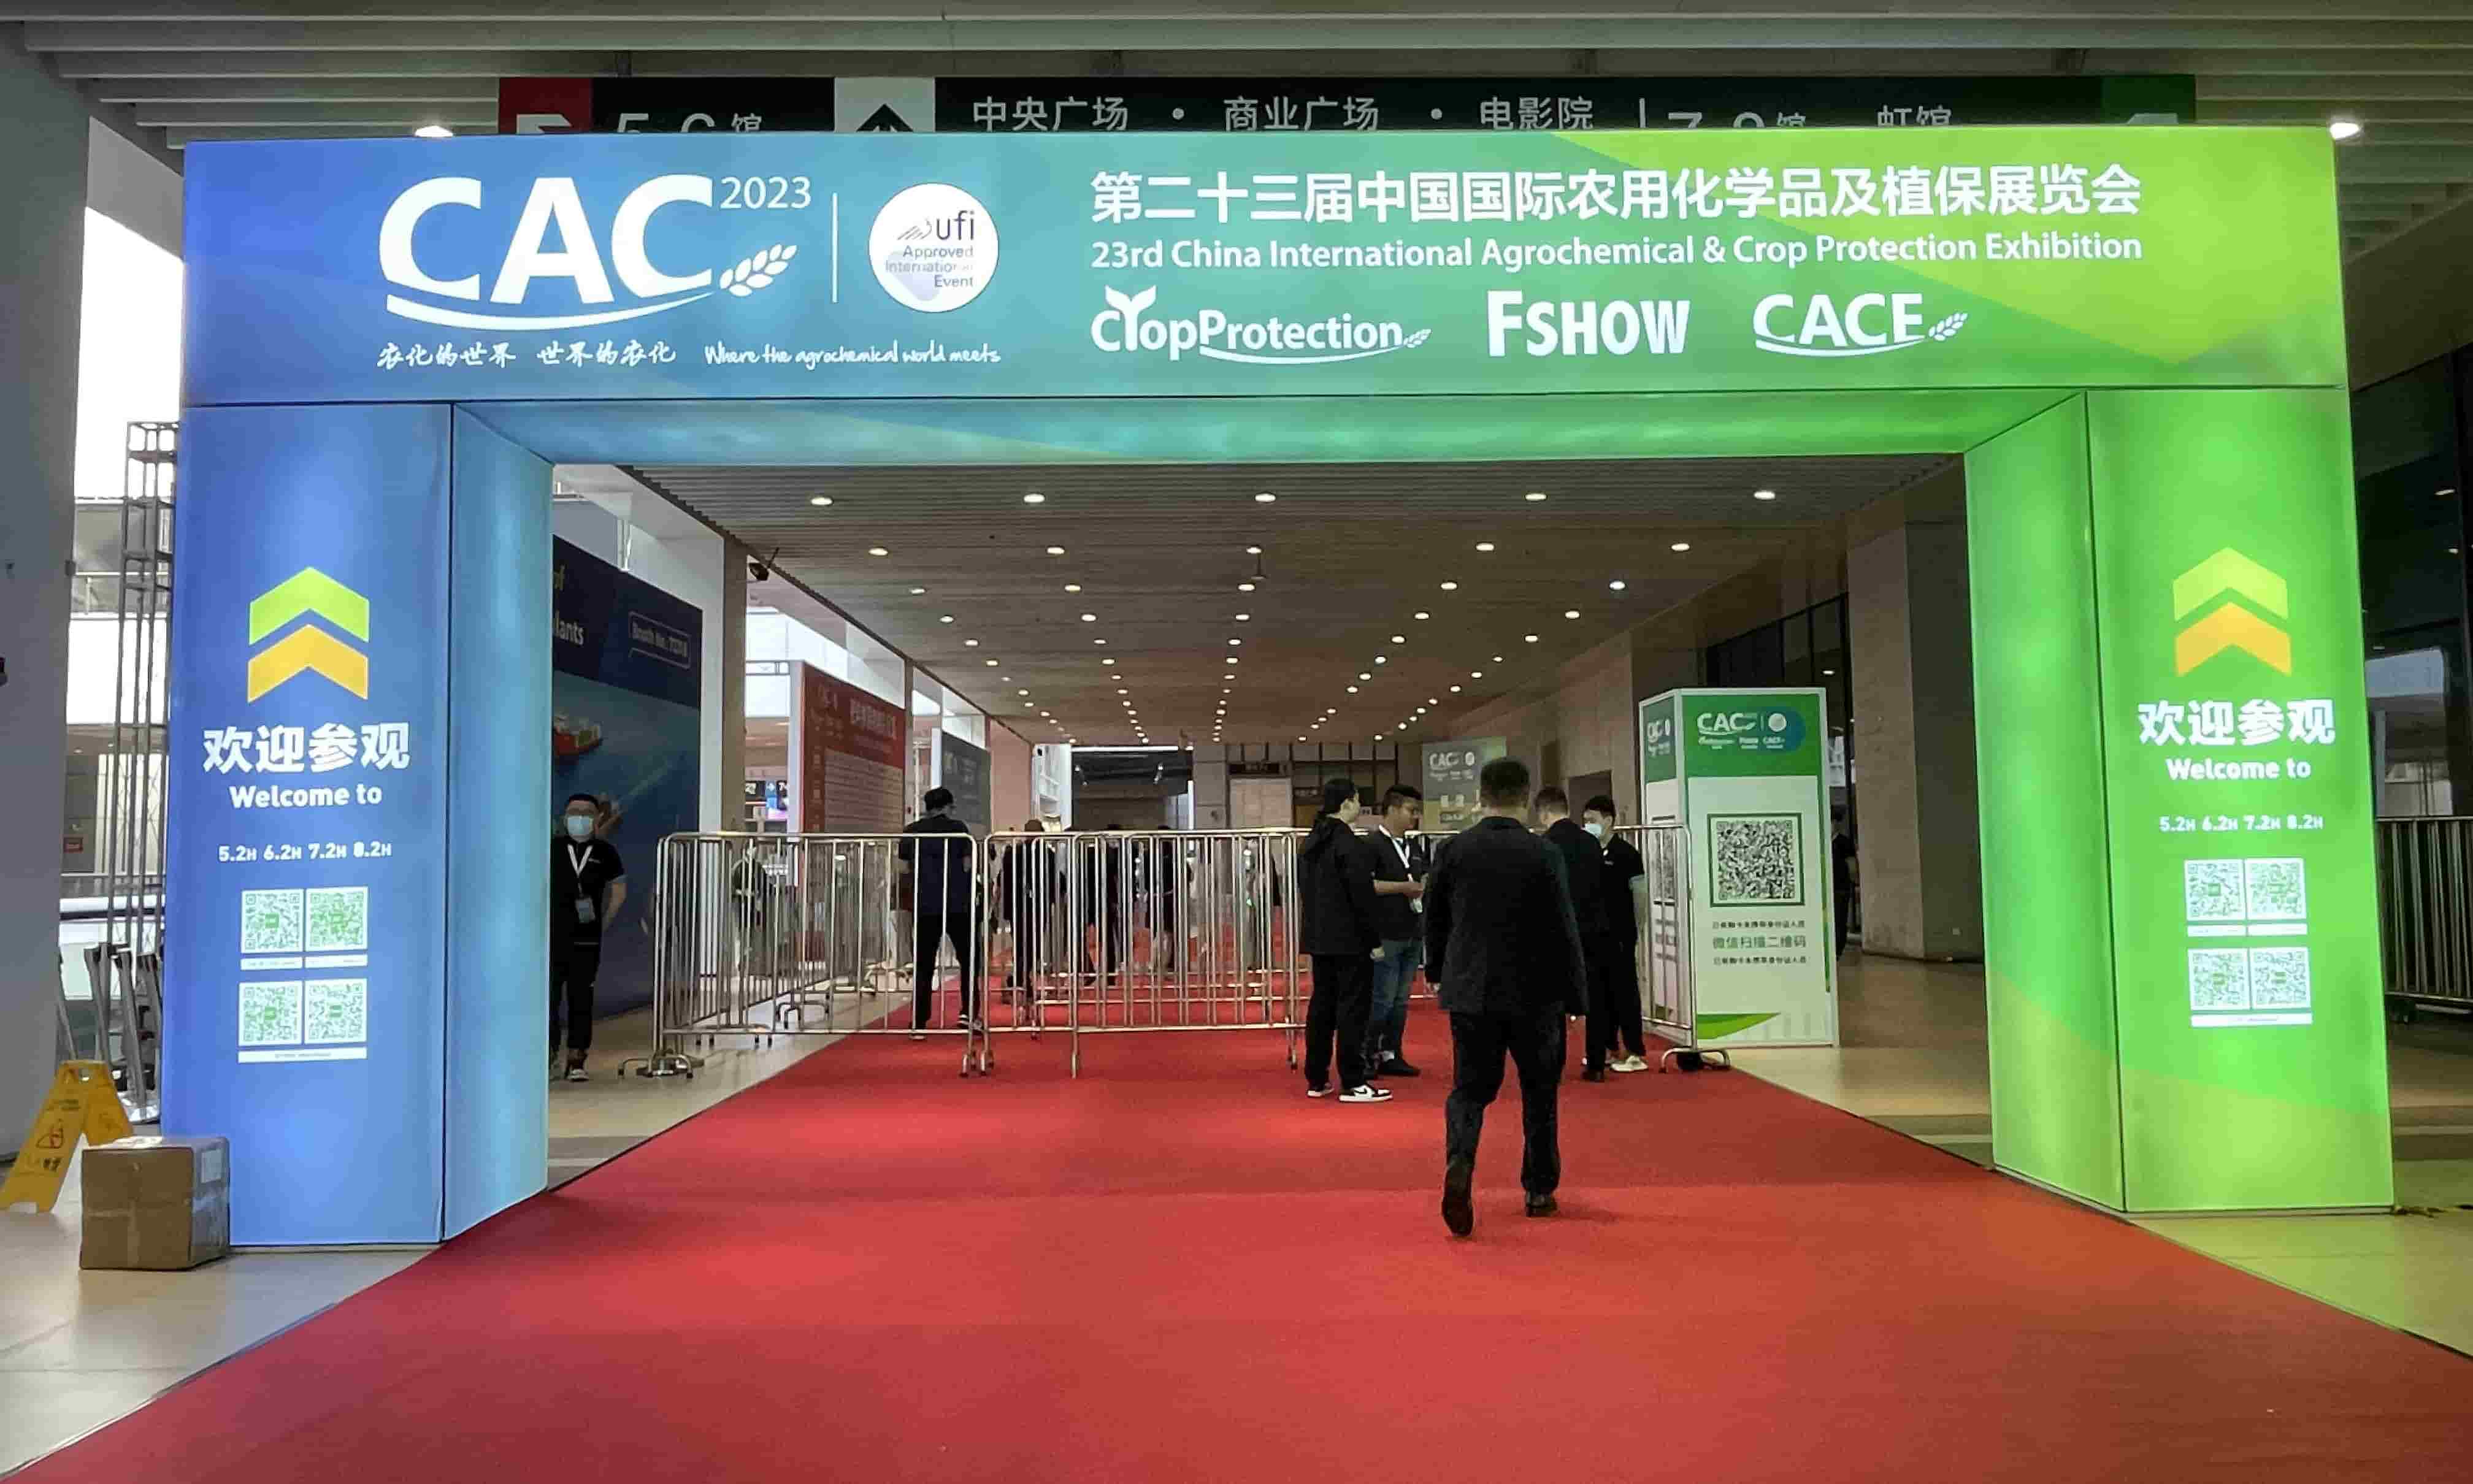 Topxgun Exhibited Their Agriculture Drones at CAC 2023 in Shanghai